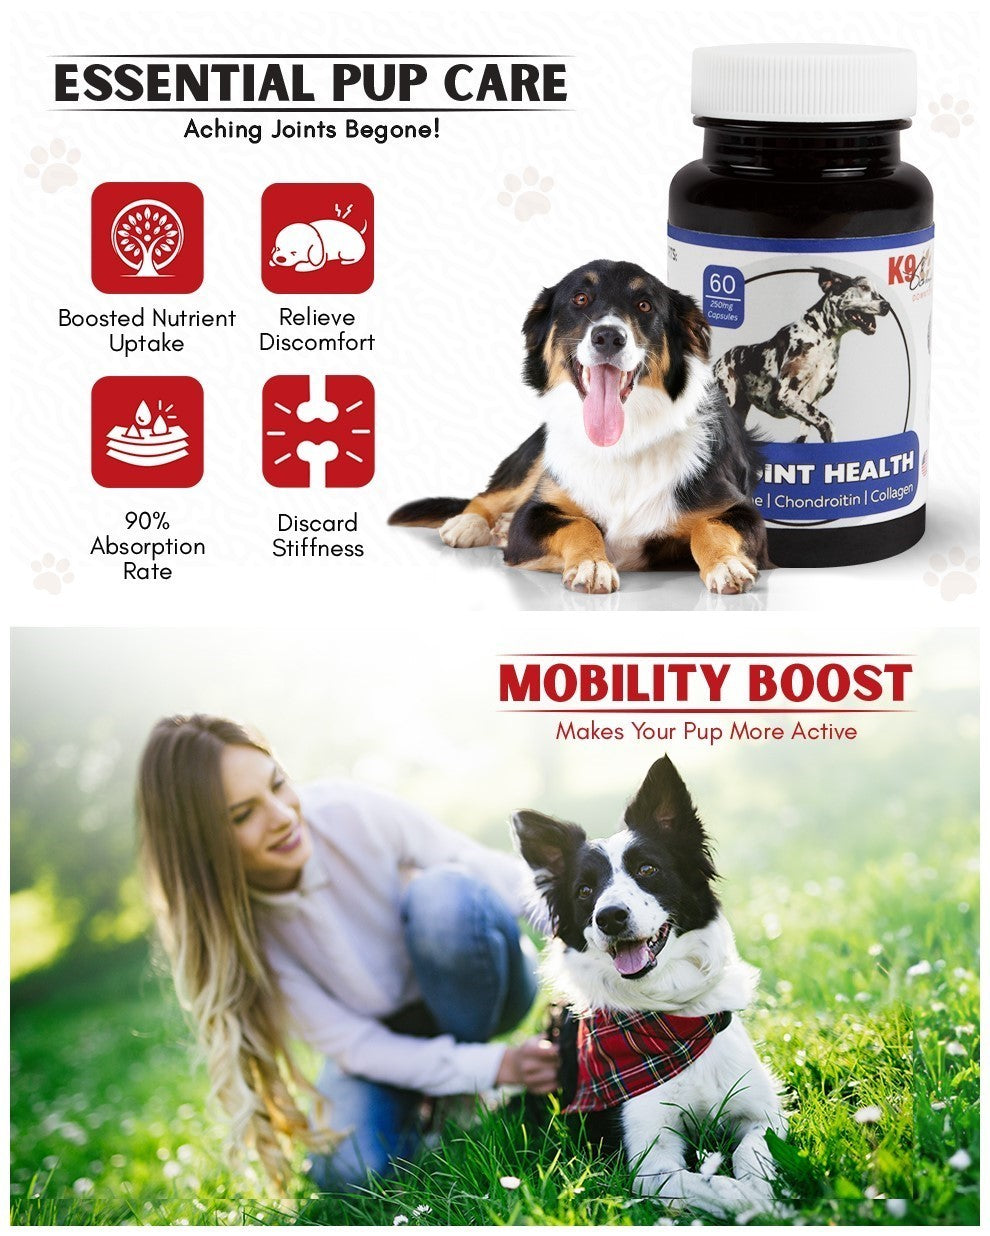 Hip & Joint Health Supplement - Vets Say Dogs Can Benefit At Any Age